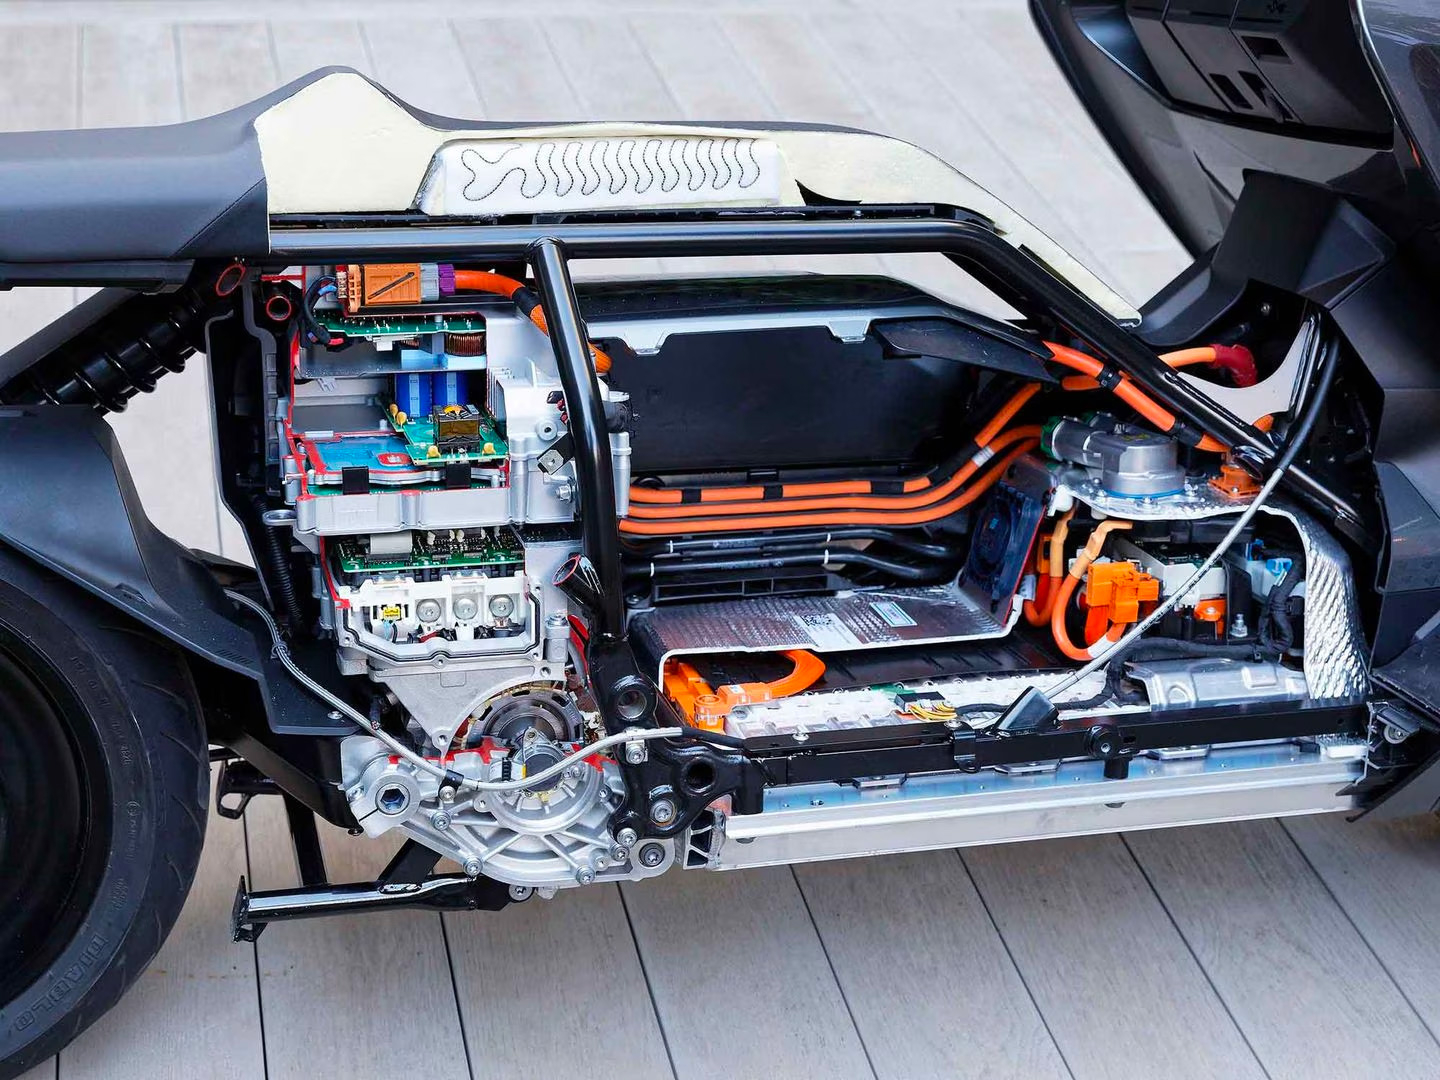 a cross section of the BMW's CE-04 electric scooter showing the internals and battery